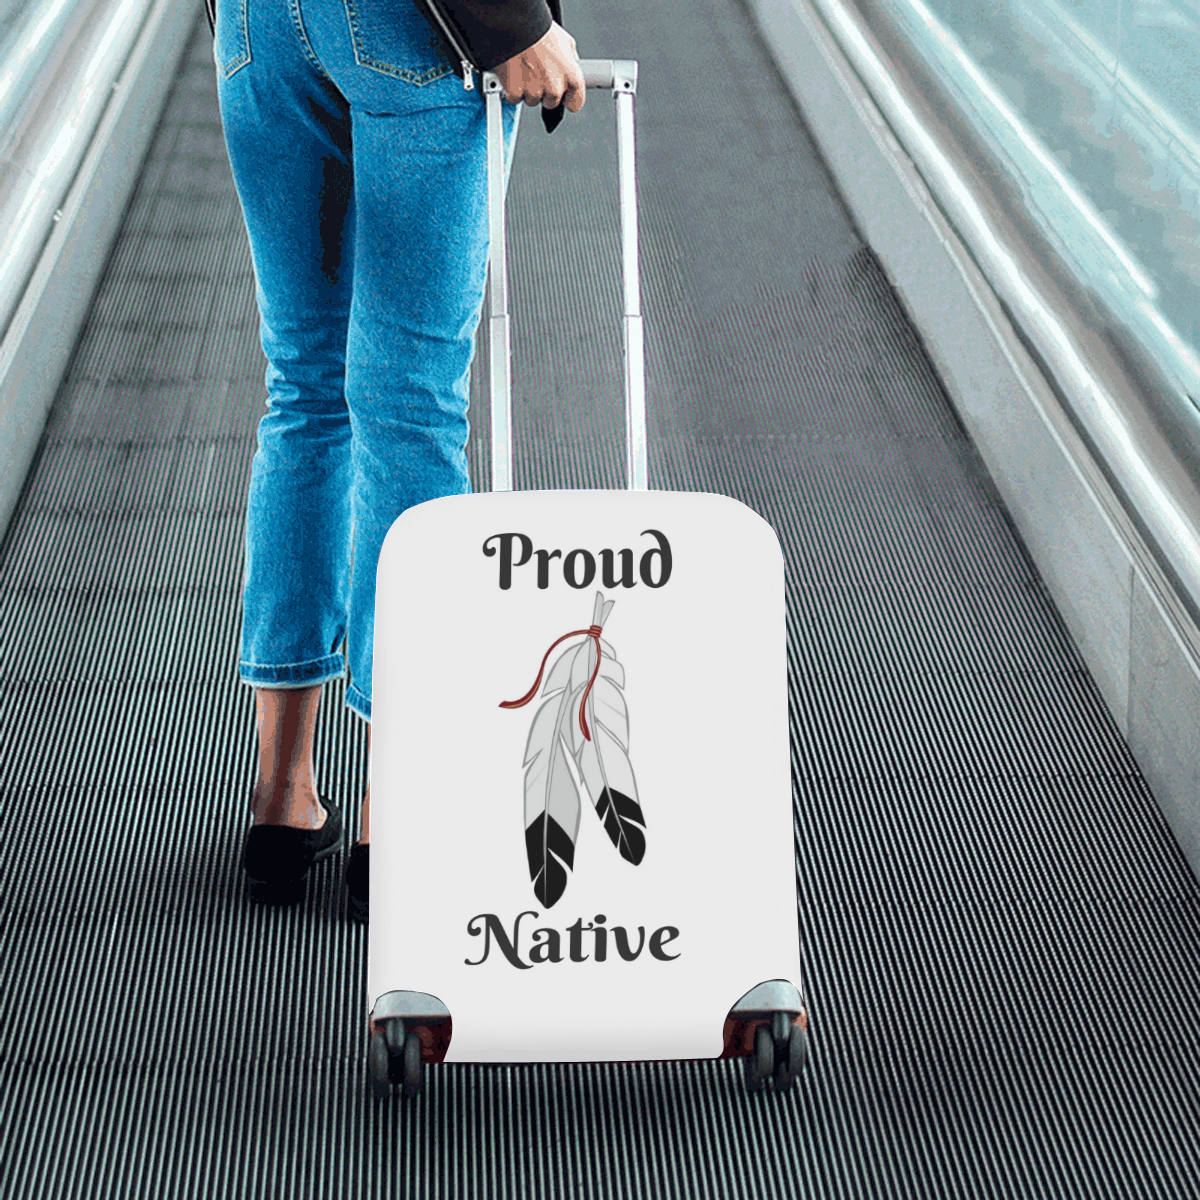 Proud Native Luggage Cover/Small 18"-21"